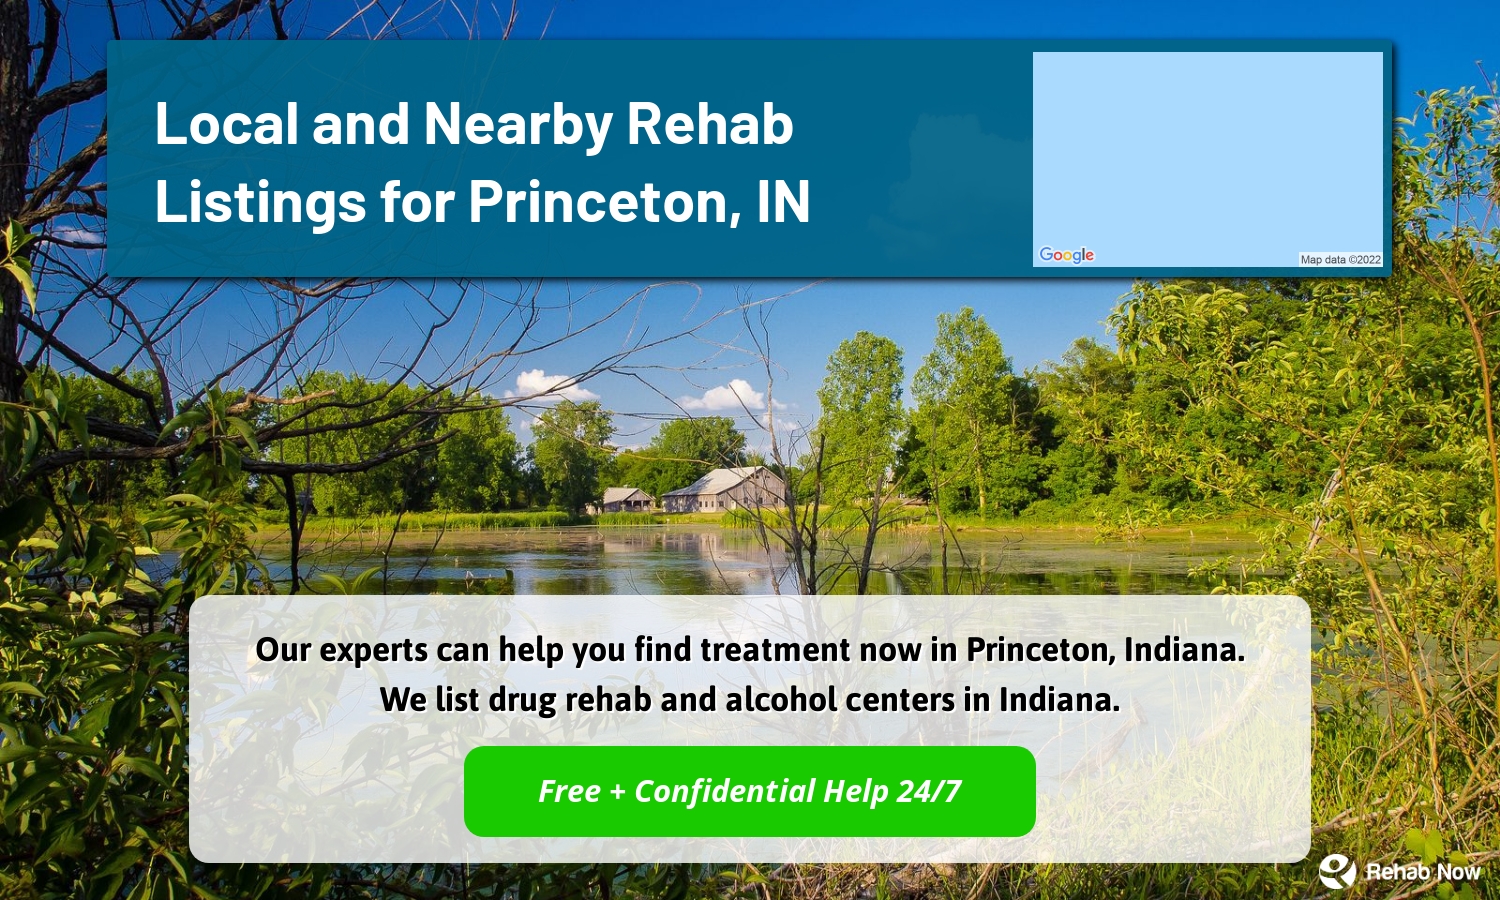 Our experts can help you find treatment now in Princeton, Indiana. We list drug rehab and alcohol centers in Indiana.